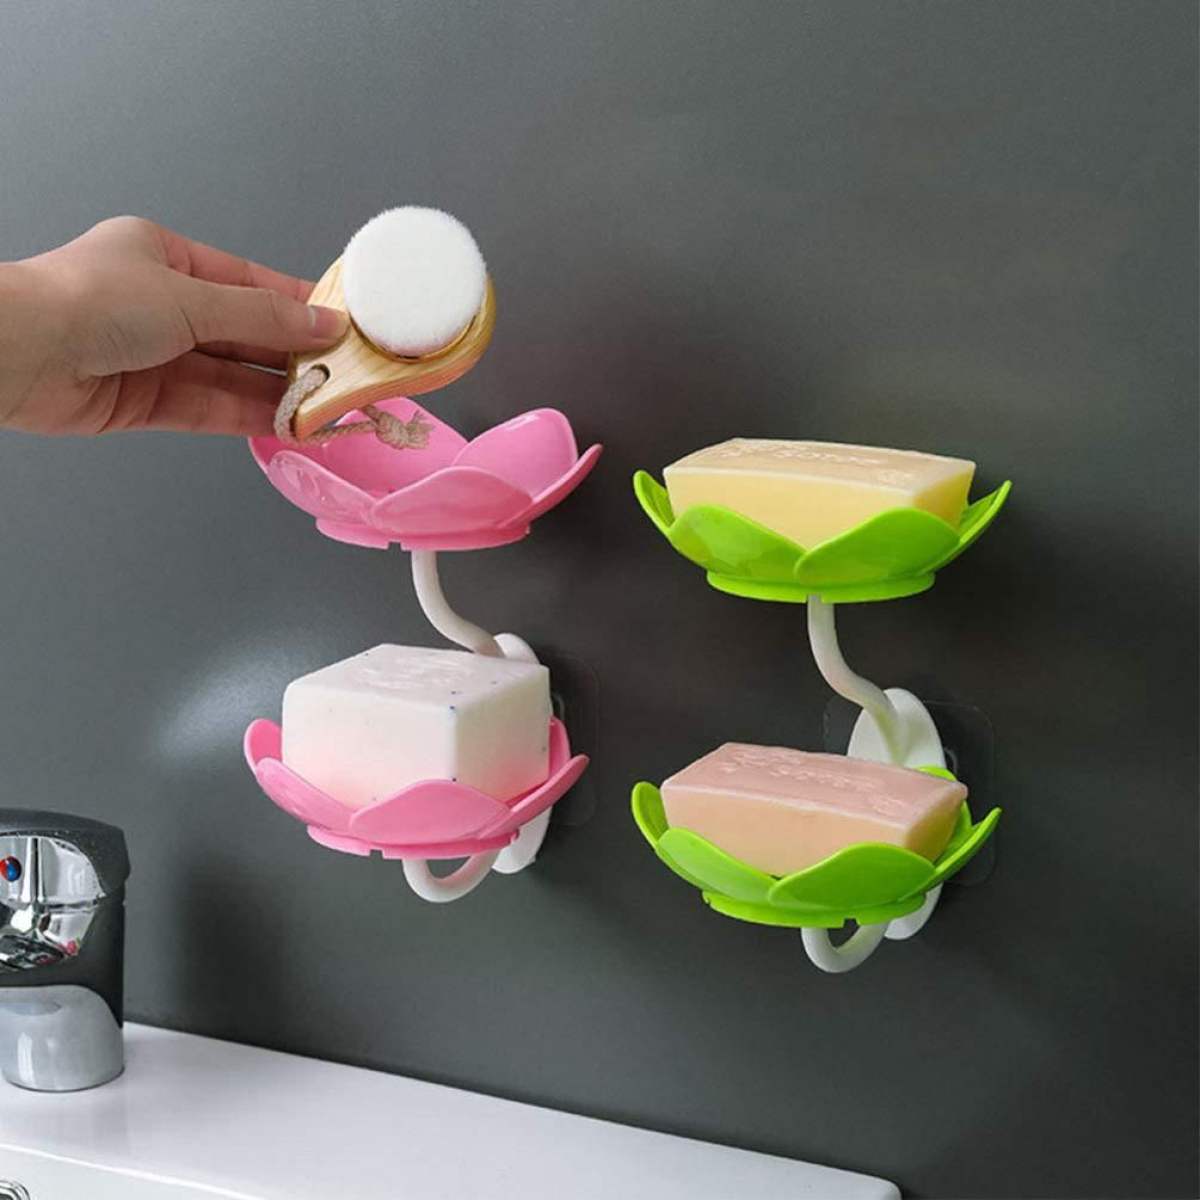 Double Layer Flower Shaped Soap Holder In Pakistan